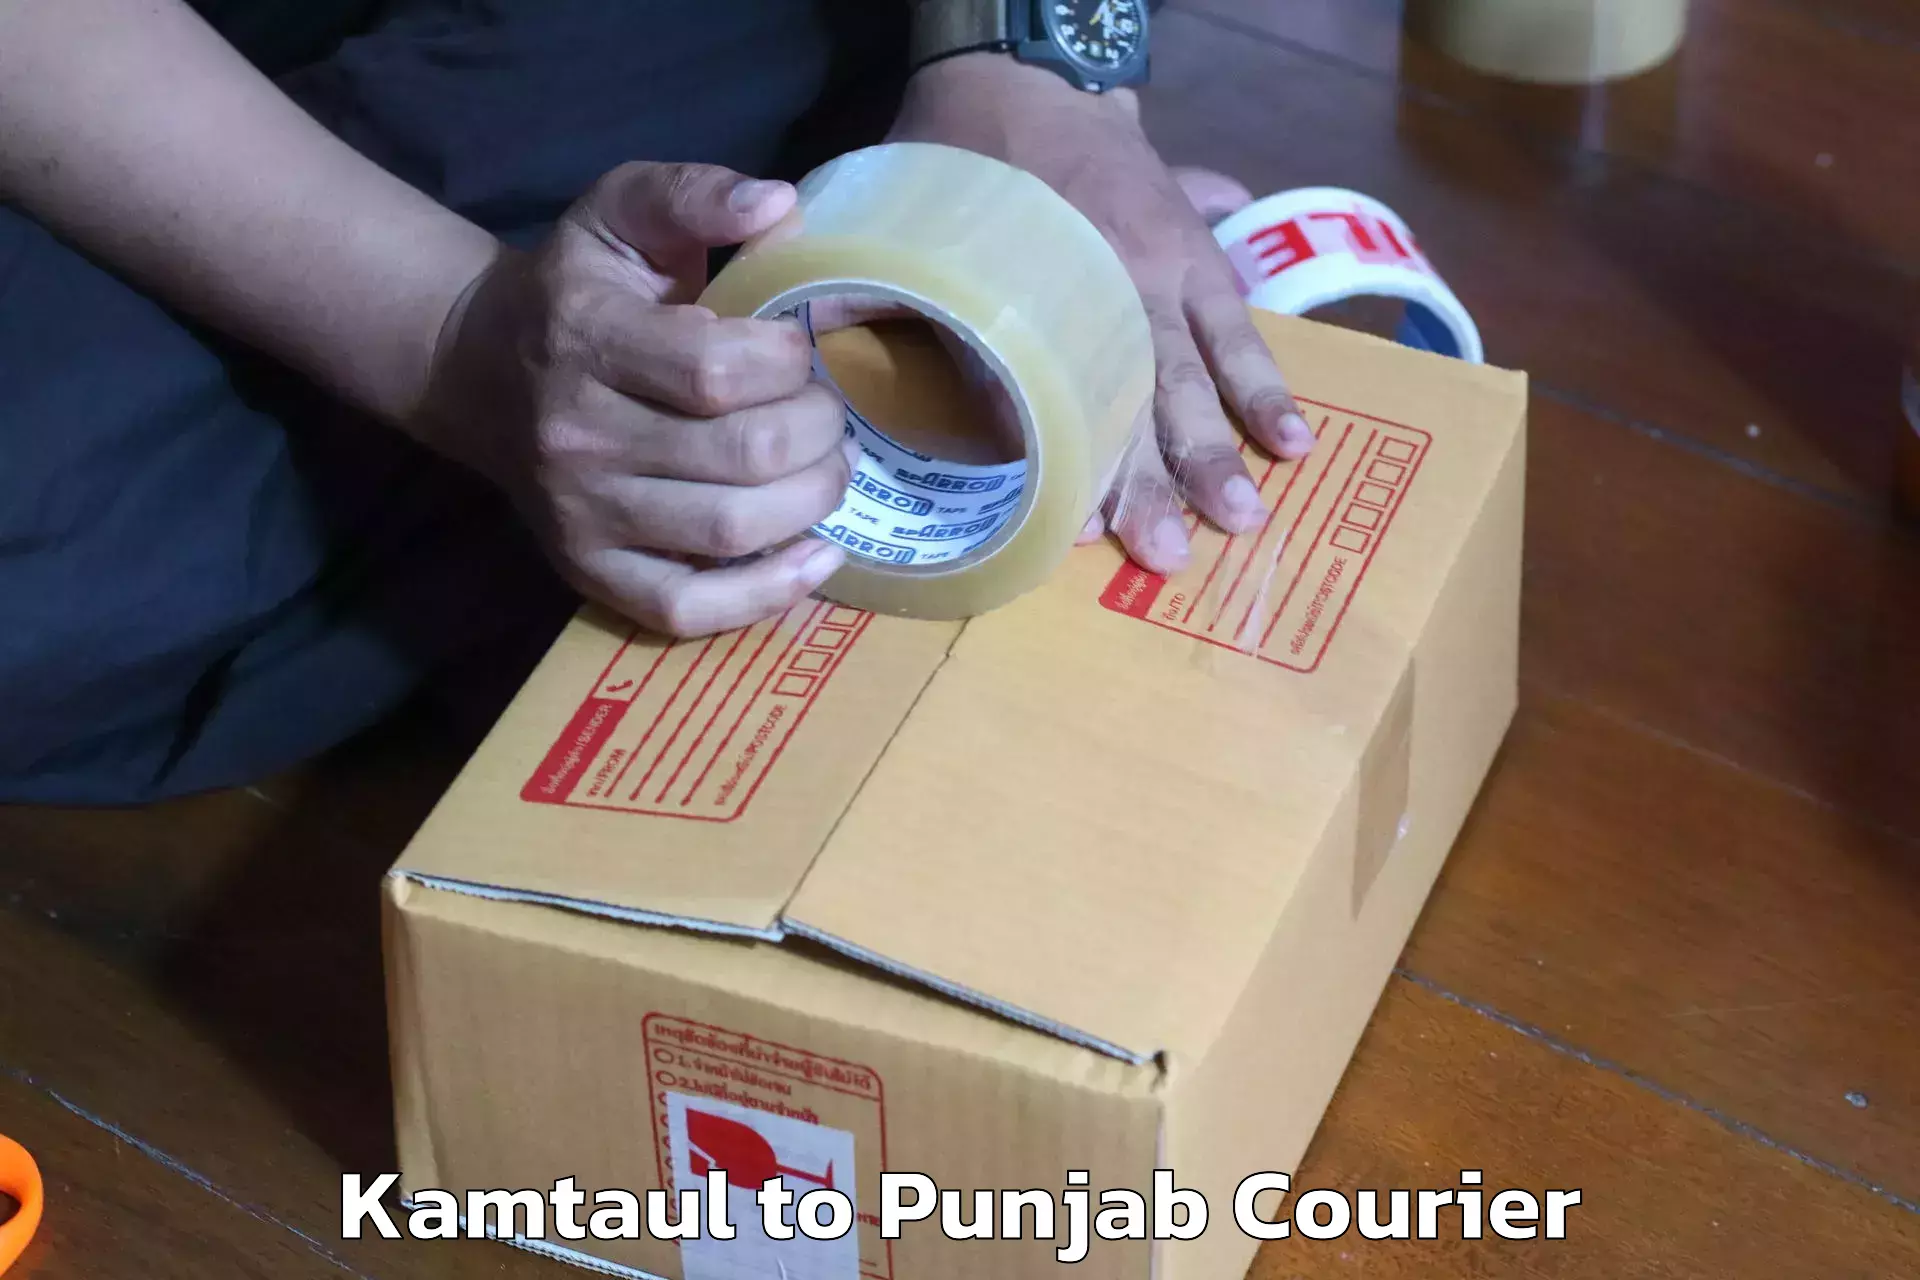 Furniture delivery service Kamtaul to Ajnala